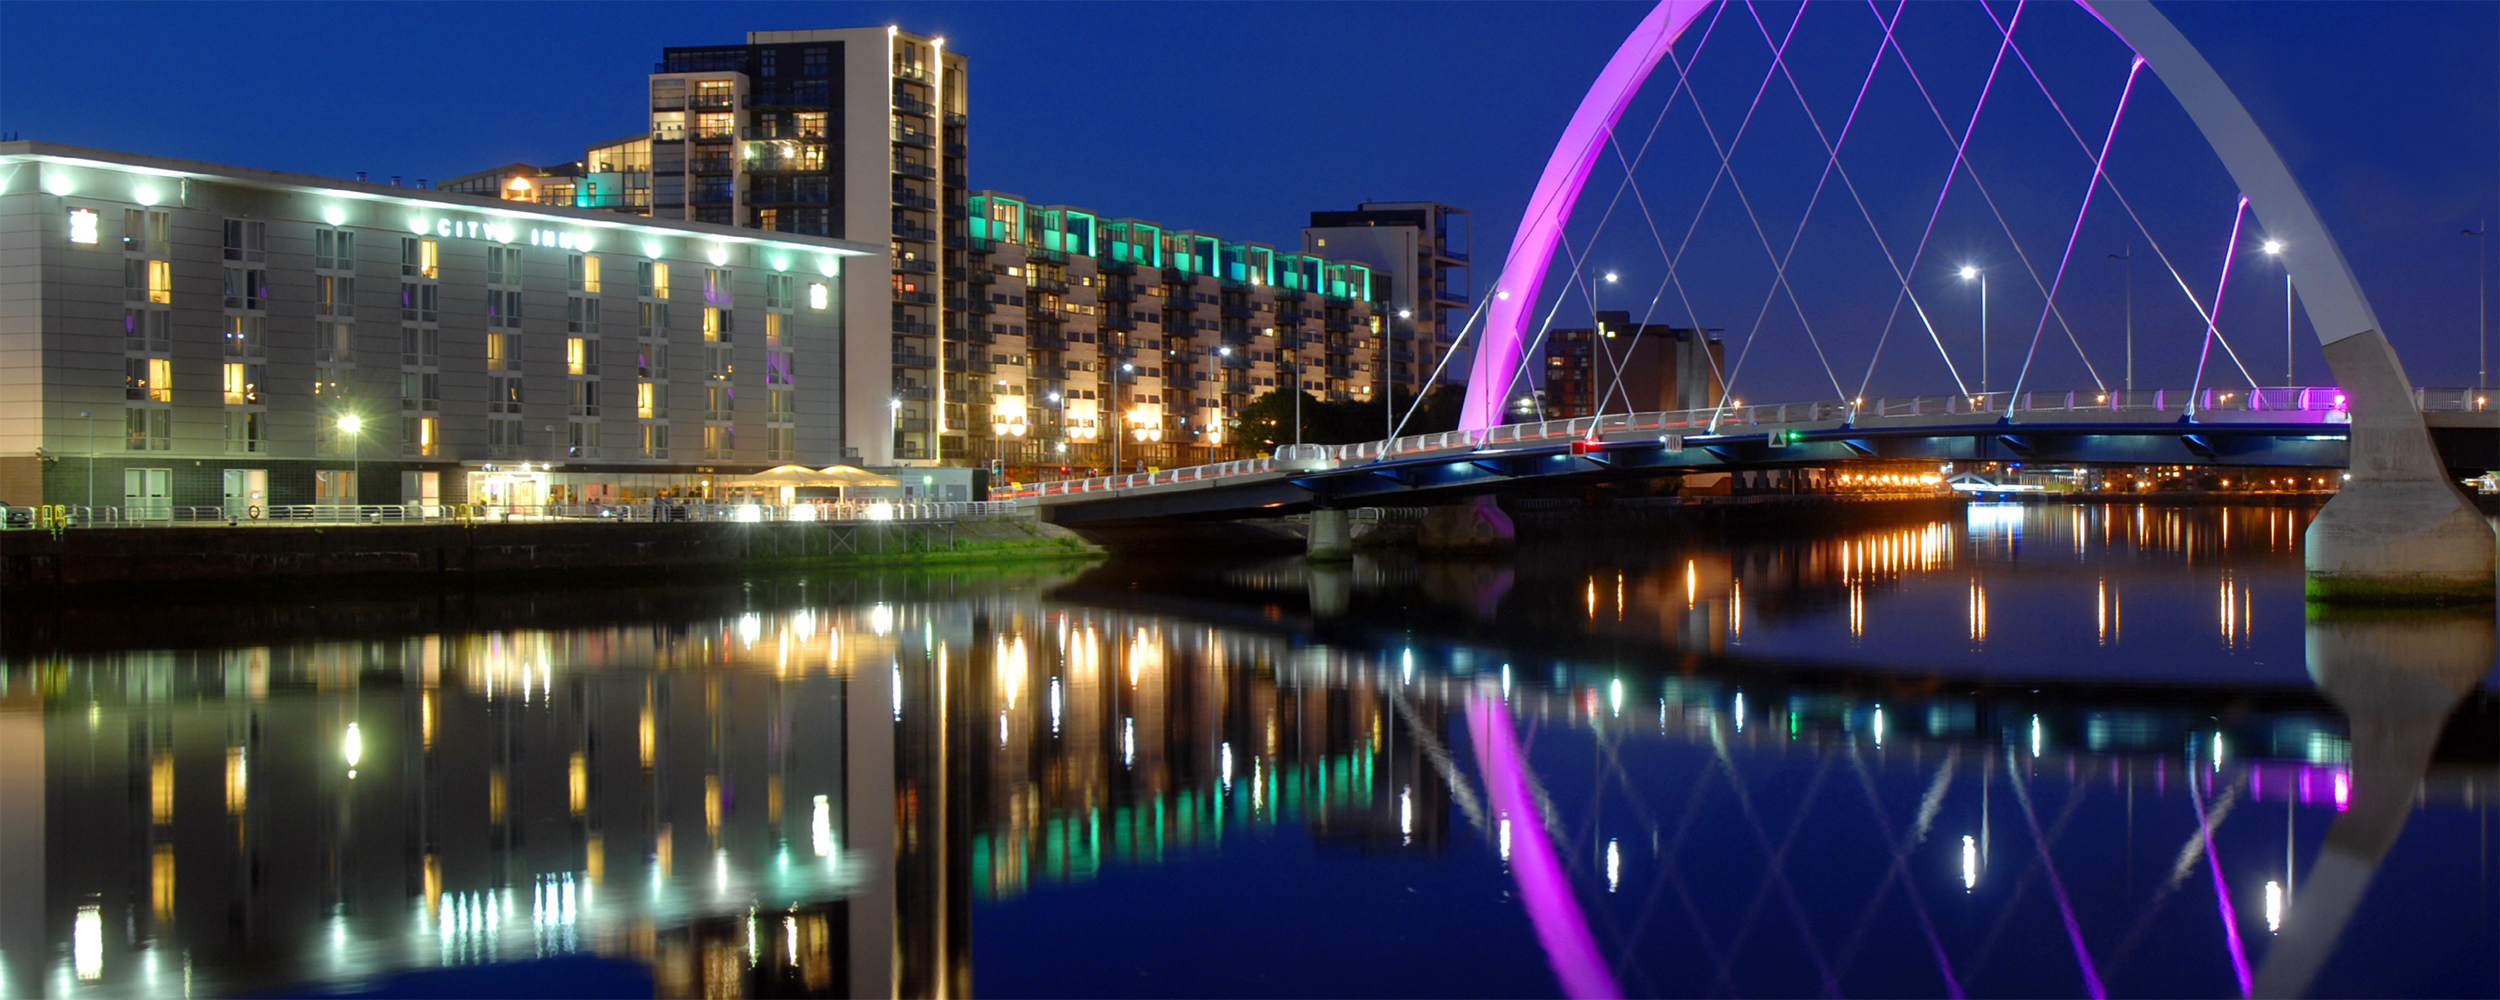 Glasgow Clyde at night panoramic scene